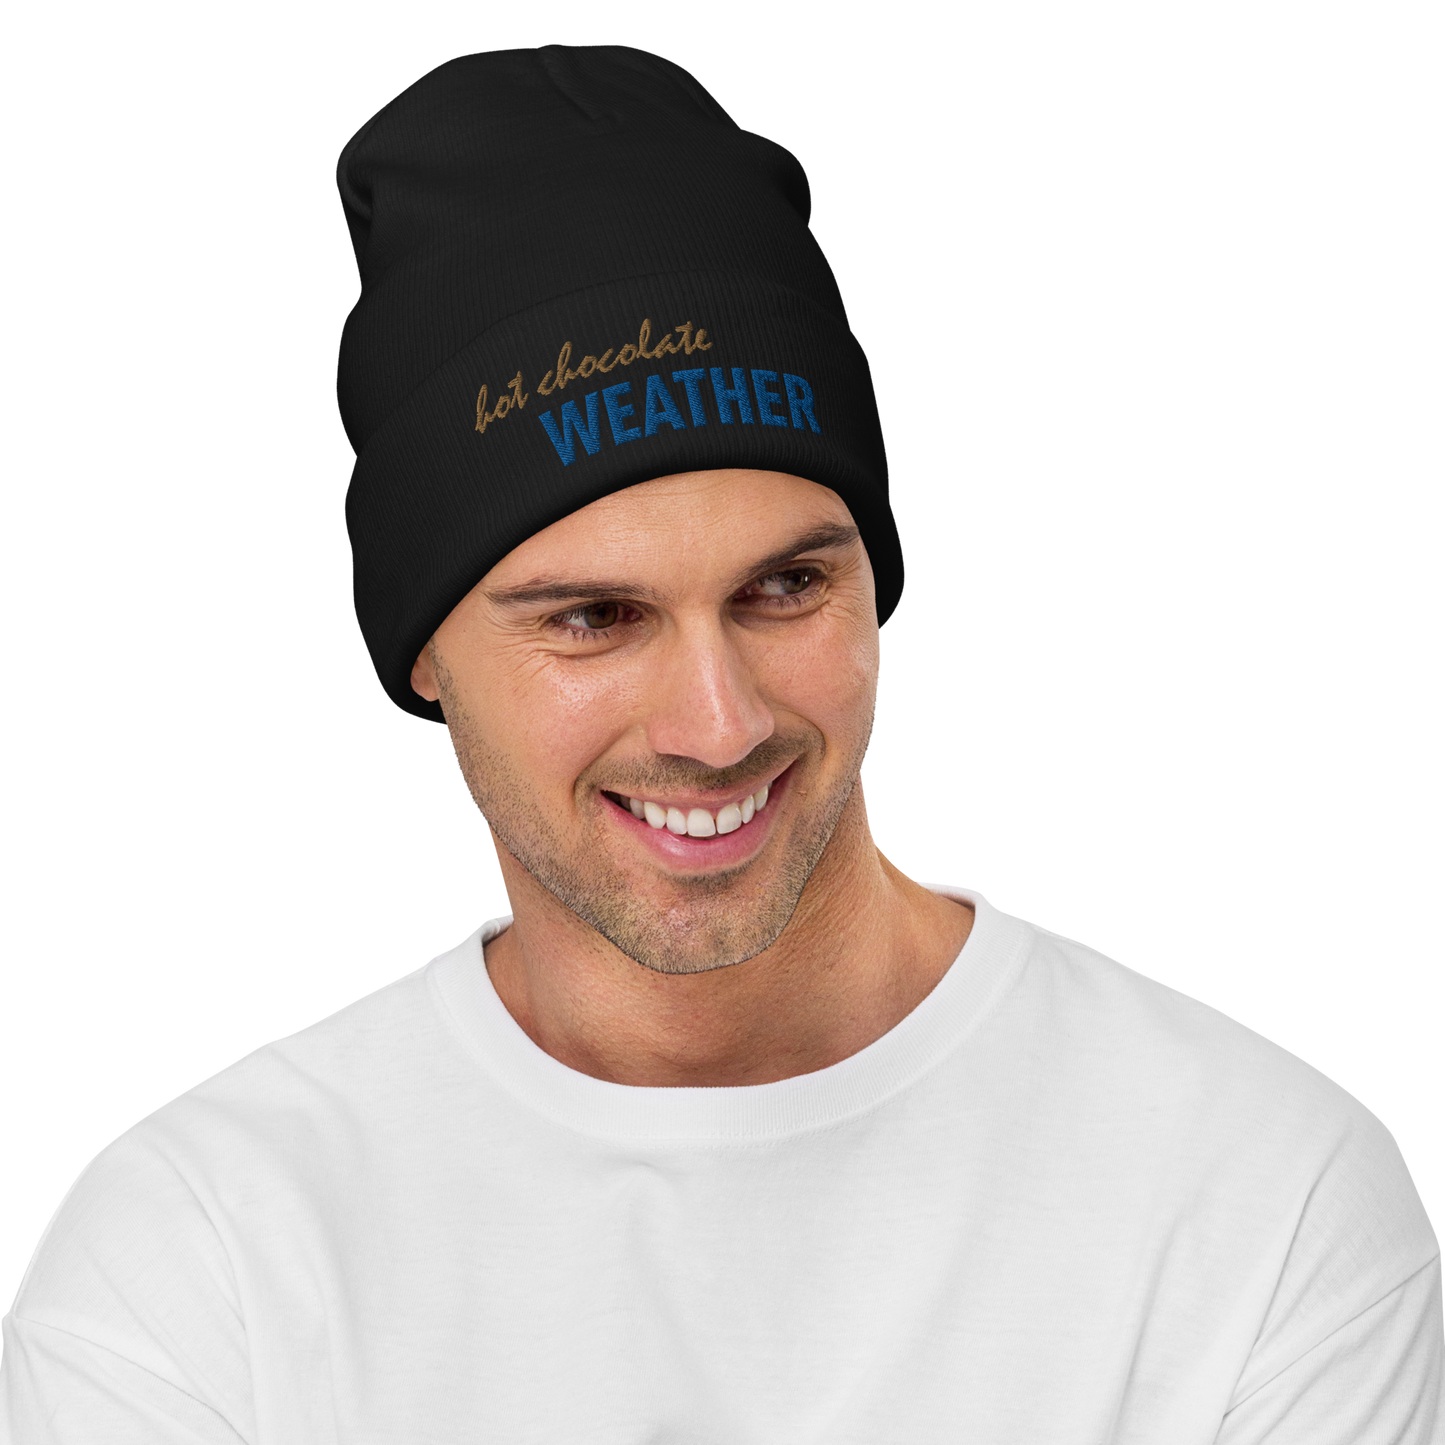 Unisex Embroidered Beanie with " Hot Chocolate weather" statement